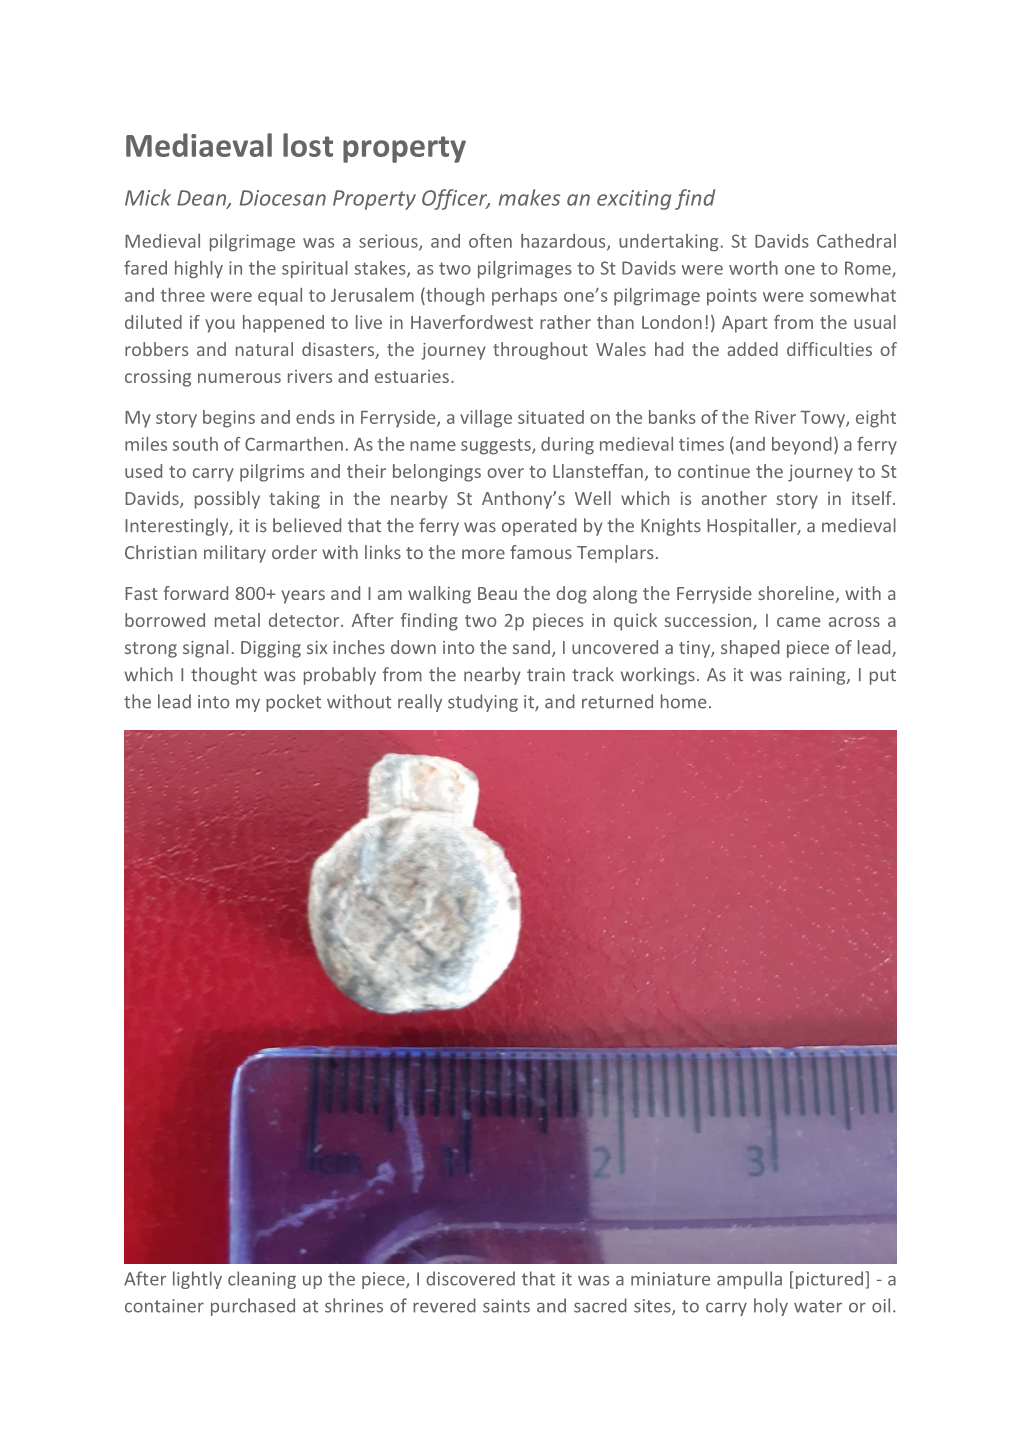 Mediaeval Lost Property Mick Dean, Diocesan Property Officer, Makes an Exciting Find